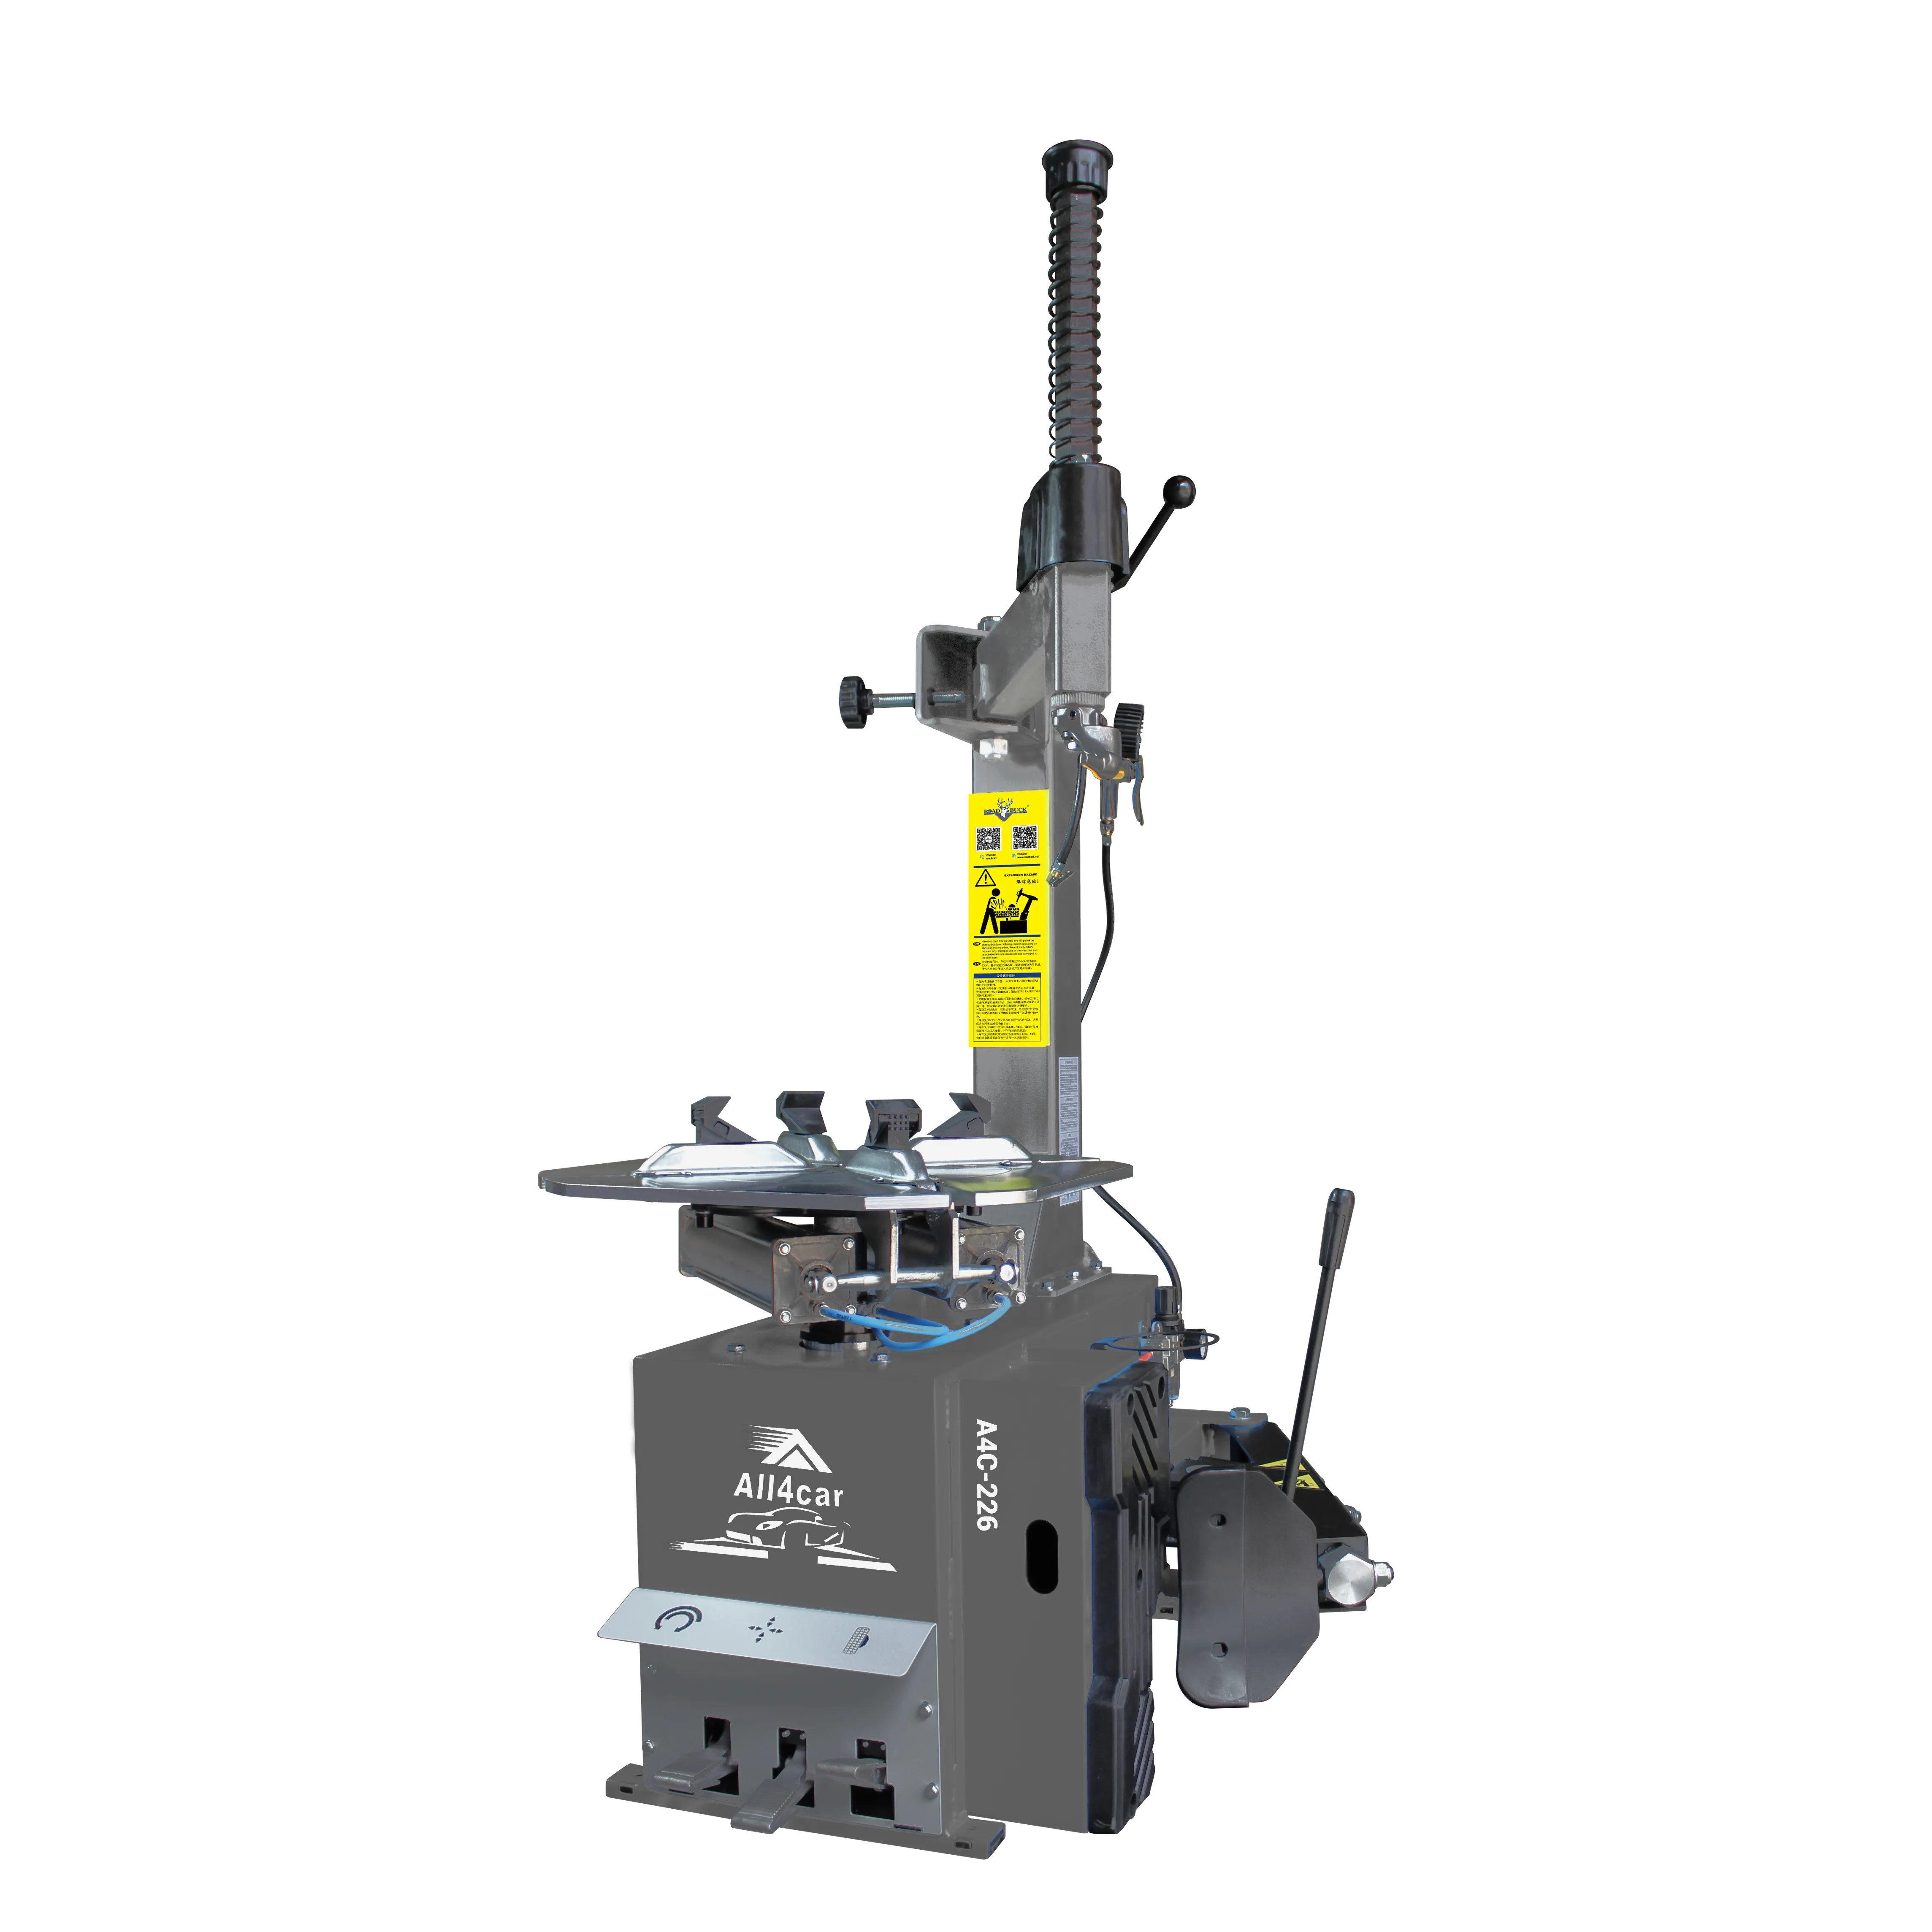 Tyre Repair Equipment / Manual Tire Changer /wheel Alignment Machine And Wheel Balancer Prices